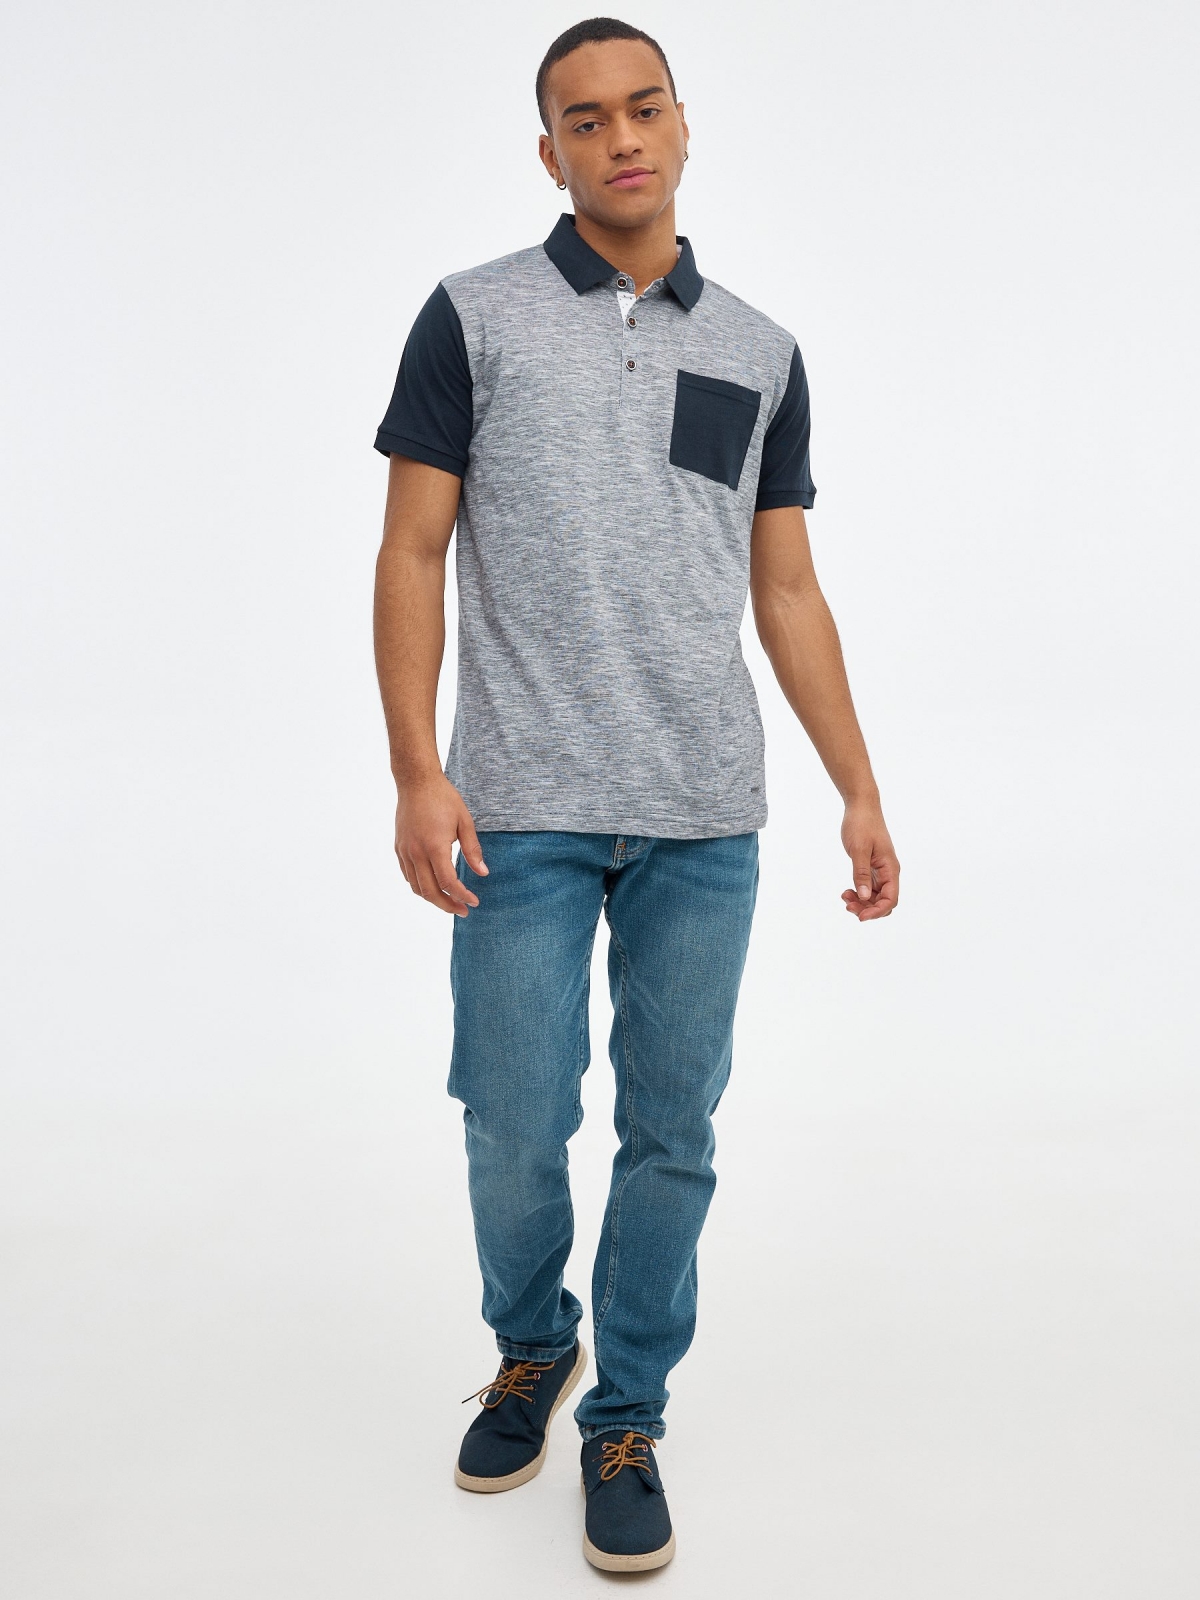 Polo shirt with contrast pocket blue front view